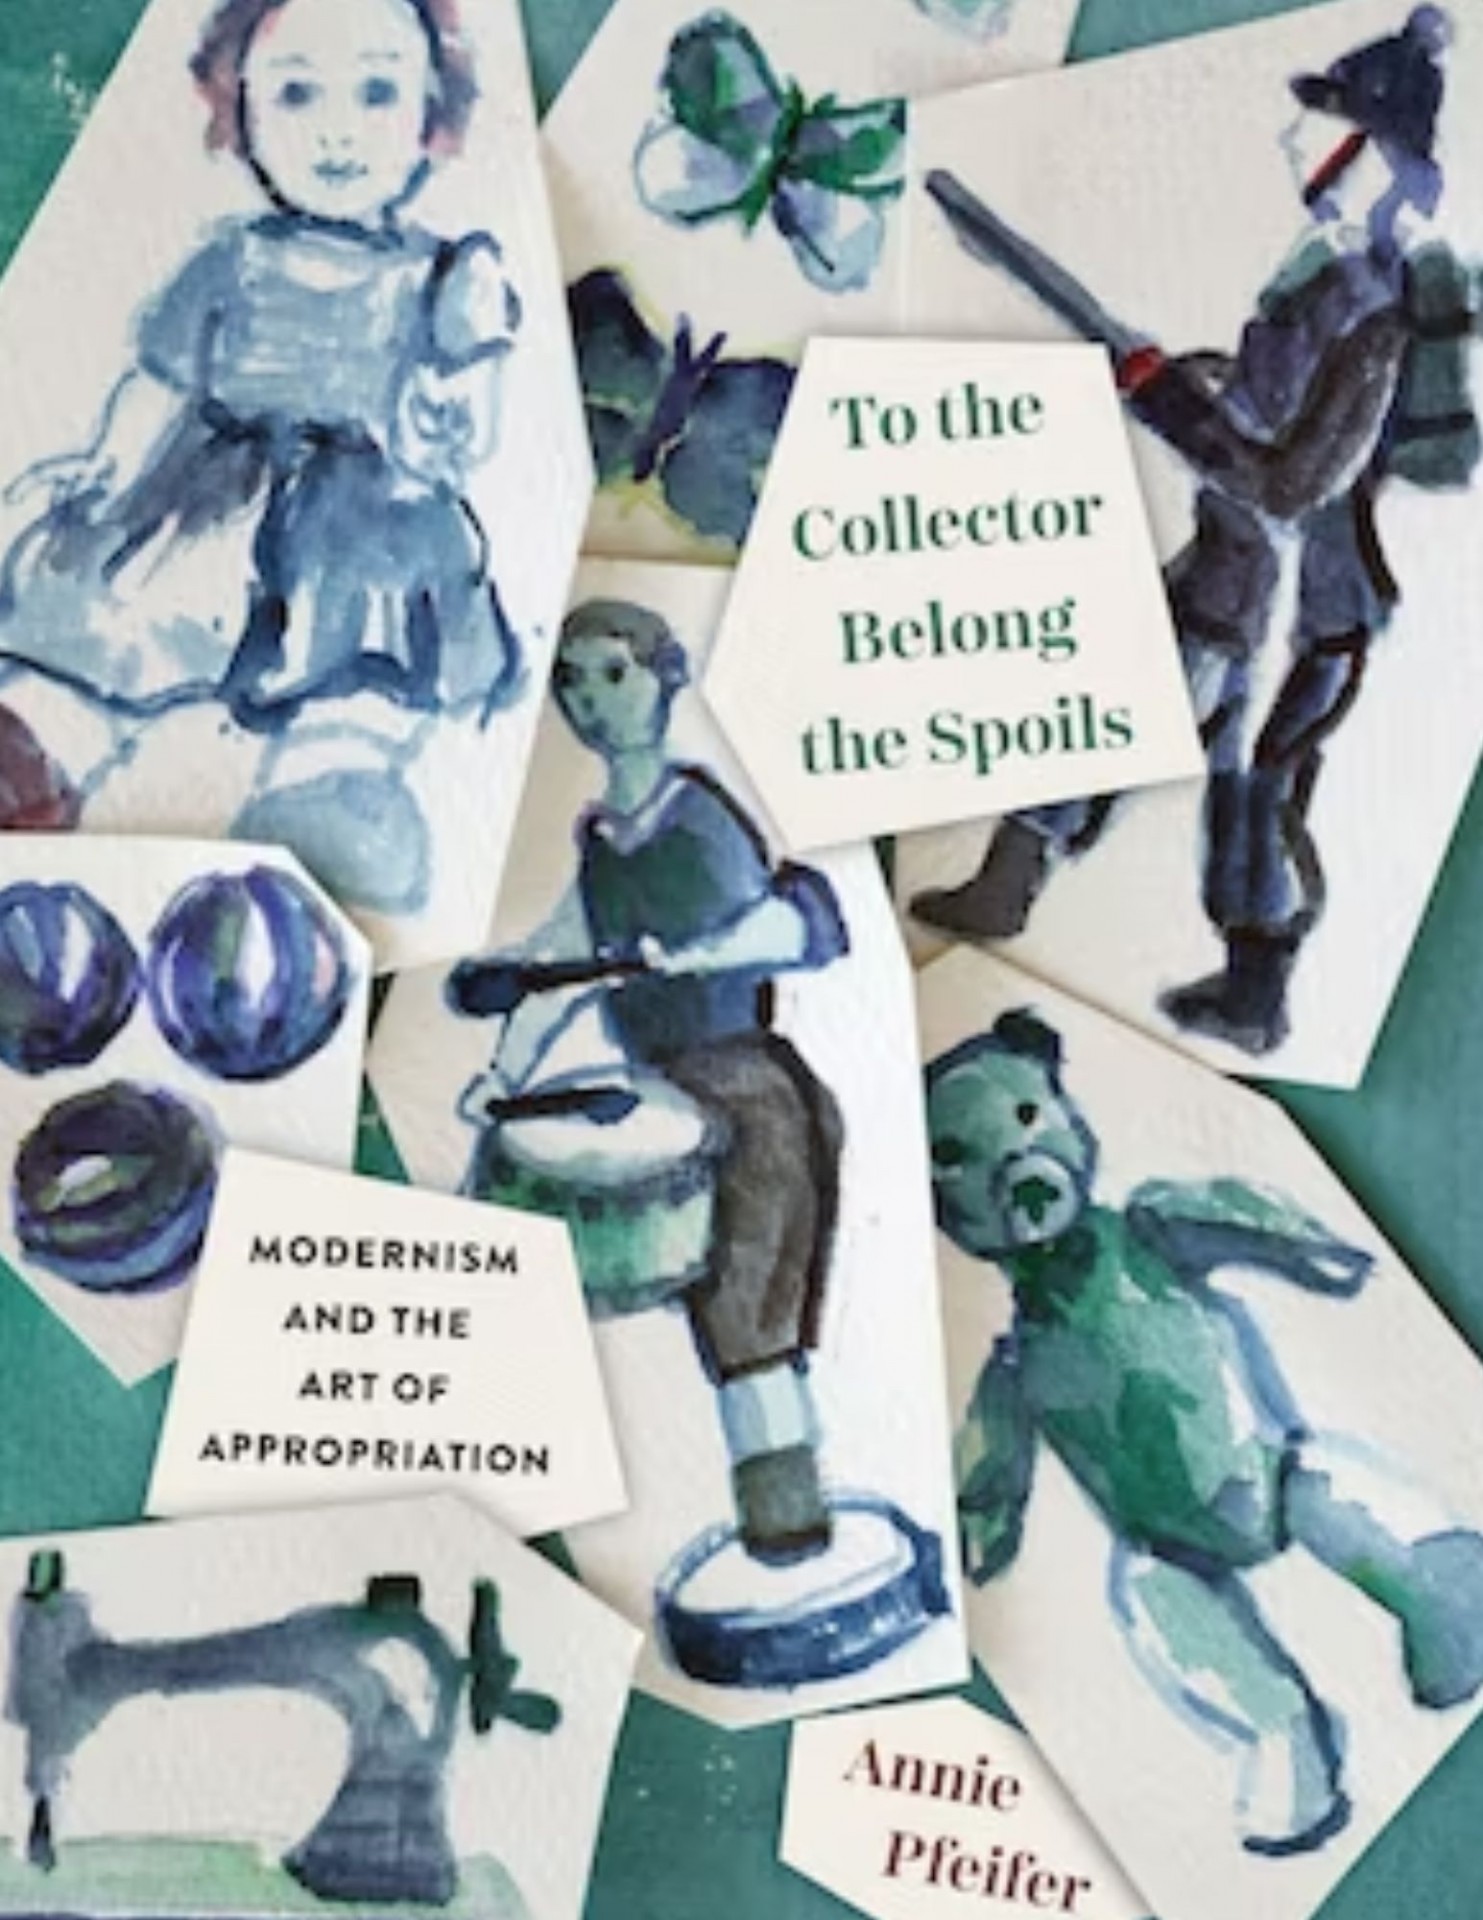 To the Collector Belong the Spoils: Modernism and the Art of Appropriation by Annie Pfeifer. Cover. 